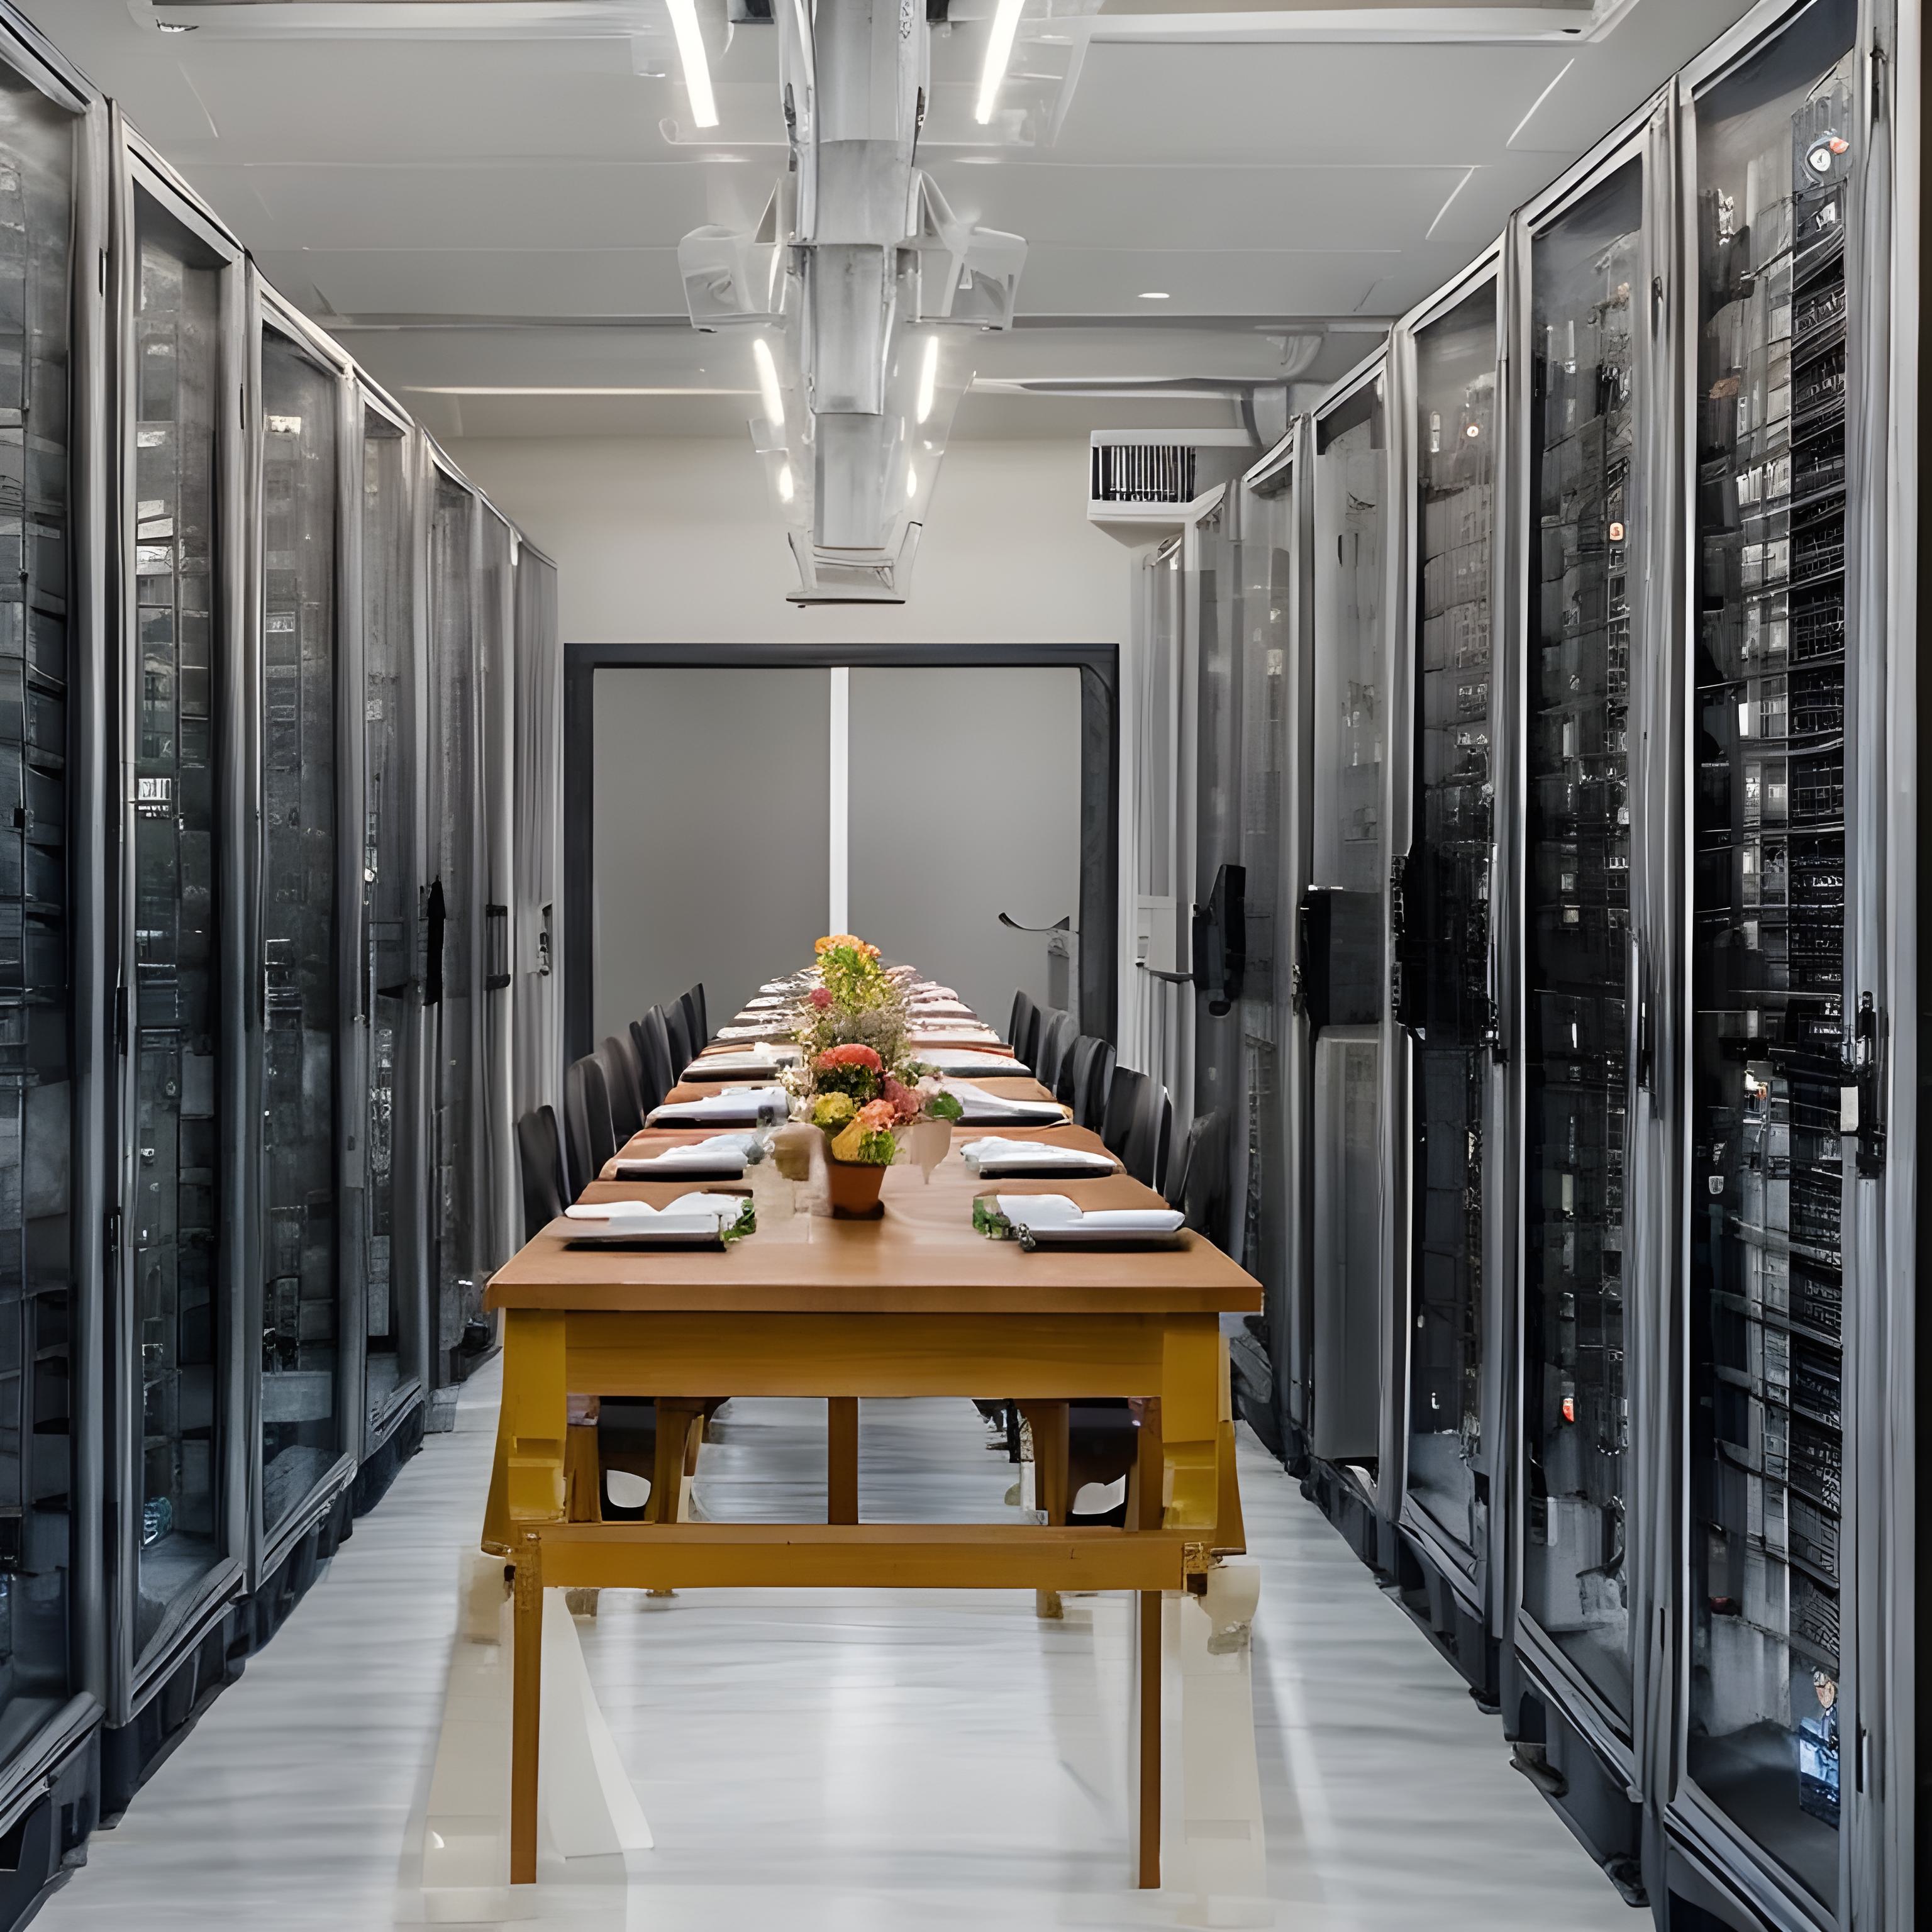 Stable Diffusion prompt: server room with a farm table meal setting in the aisle